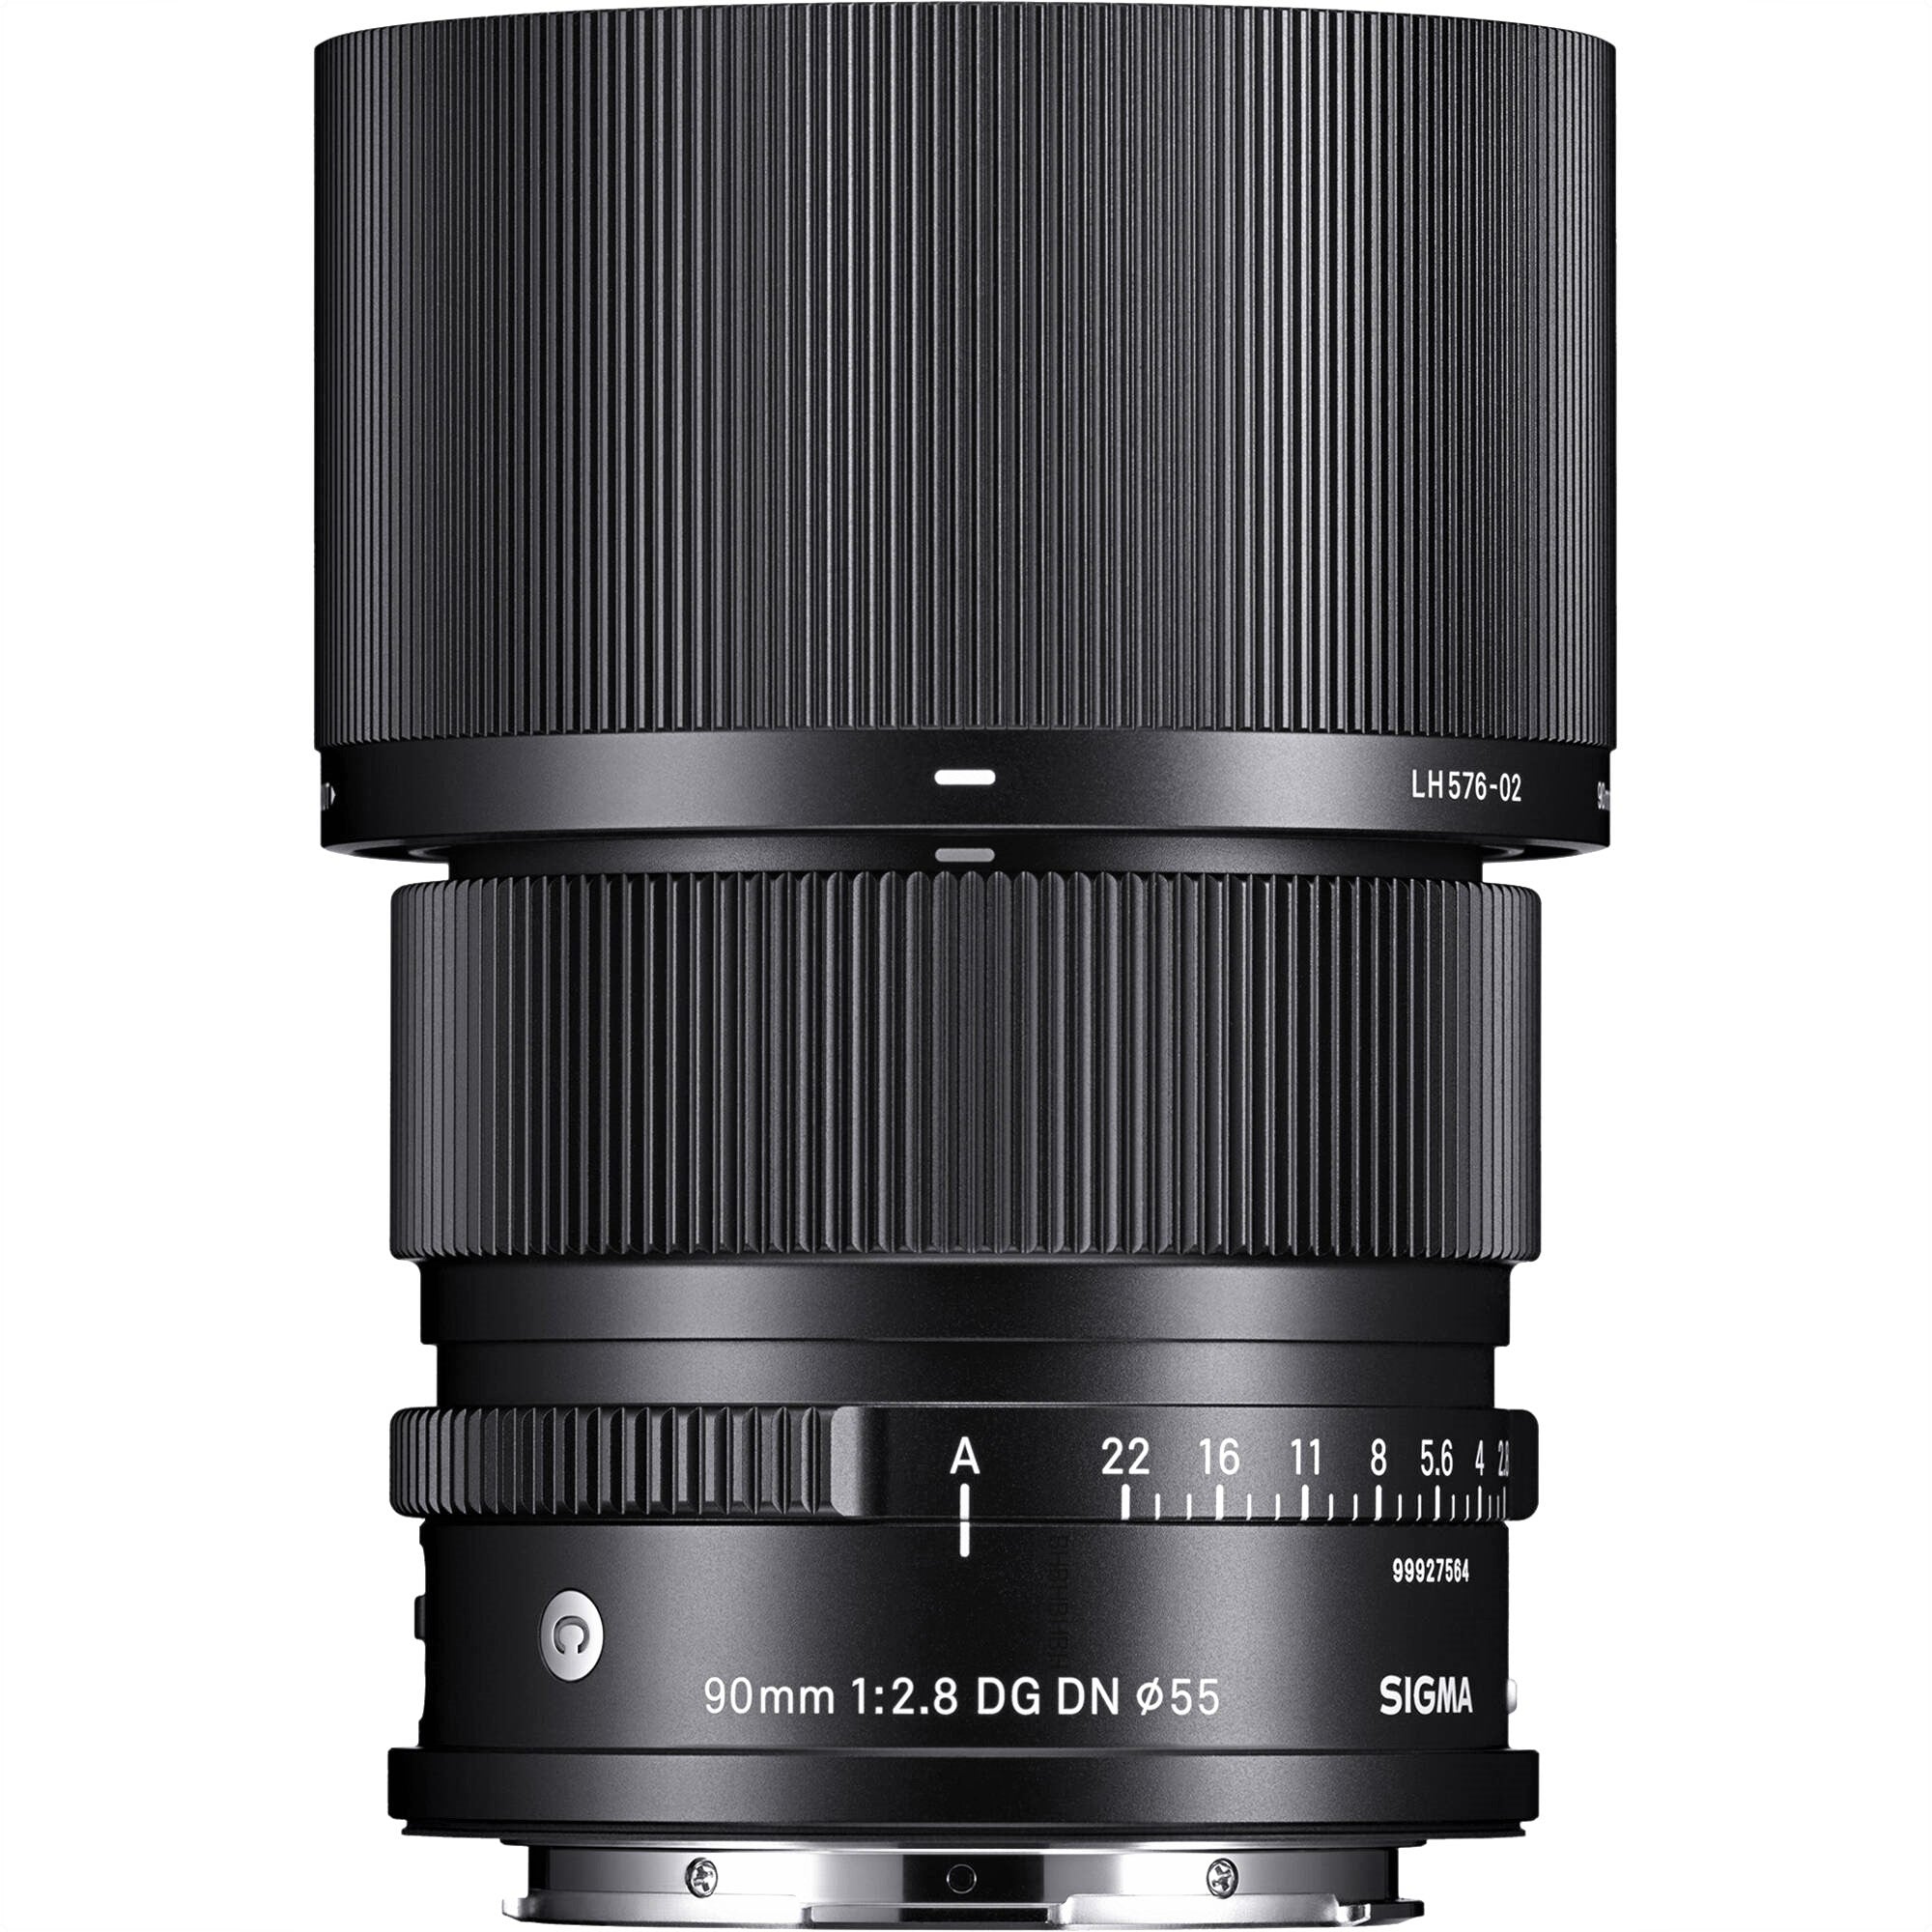 Sigma 90mm F2.8 DG DN Contemporary Lens for Leica L with Attached Lens Hood on the Top